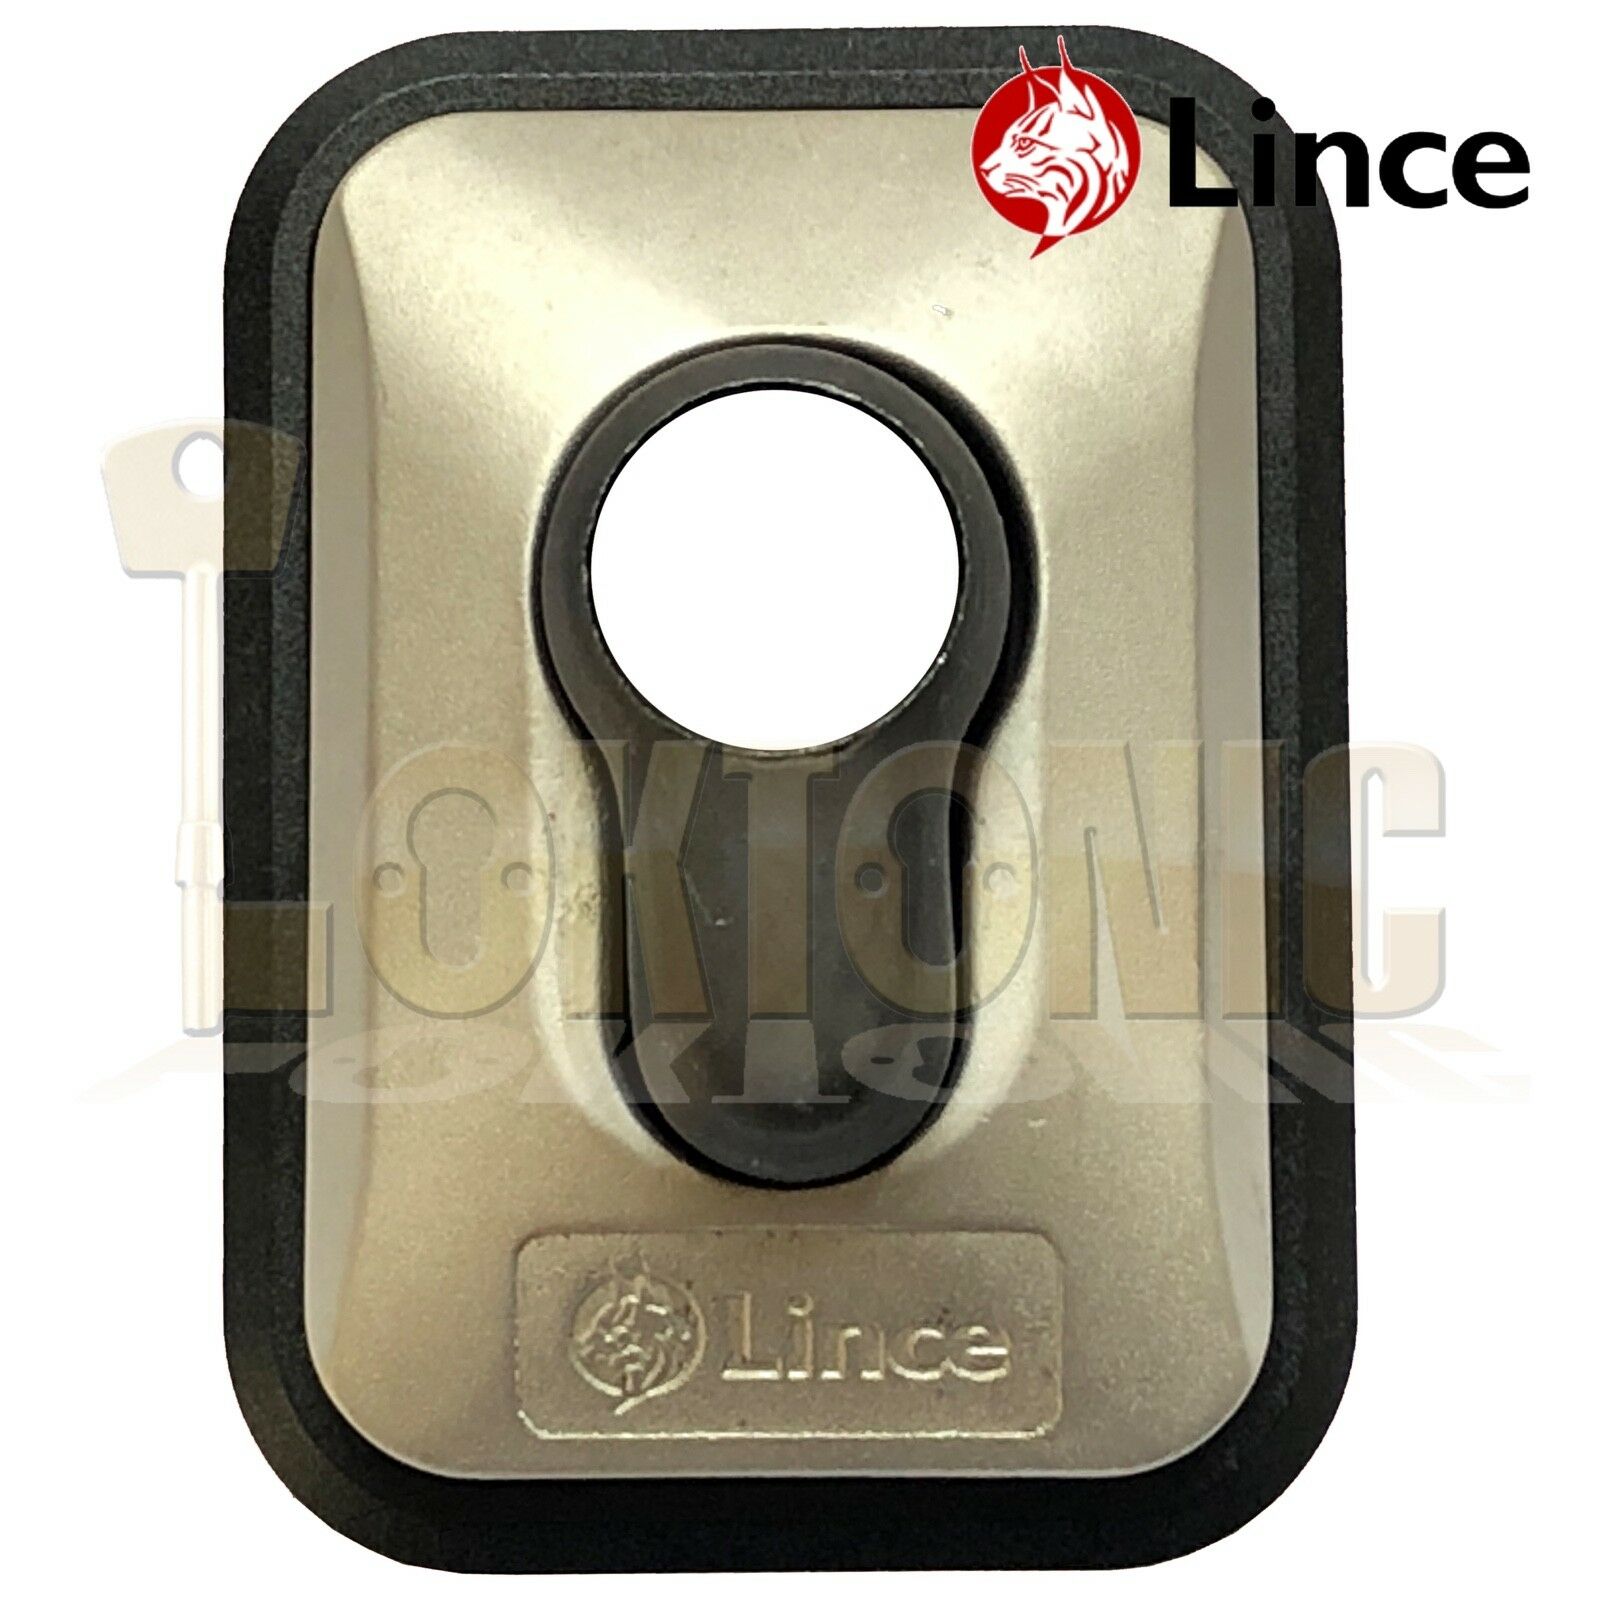 https://loktonic.co.uk/wp-content/uploads/imported/9/Lince-High-Security-Euro-Cylinder-Escutcheon-Keyhole-Cover-Plate-Front-Doors-Van-223363465849-2.jpg